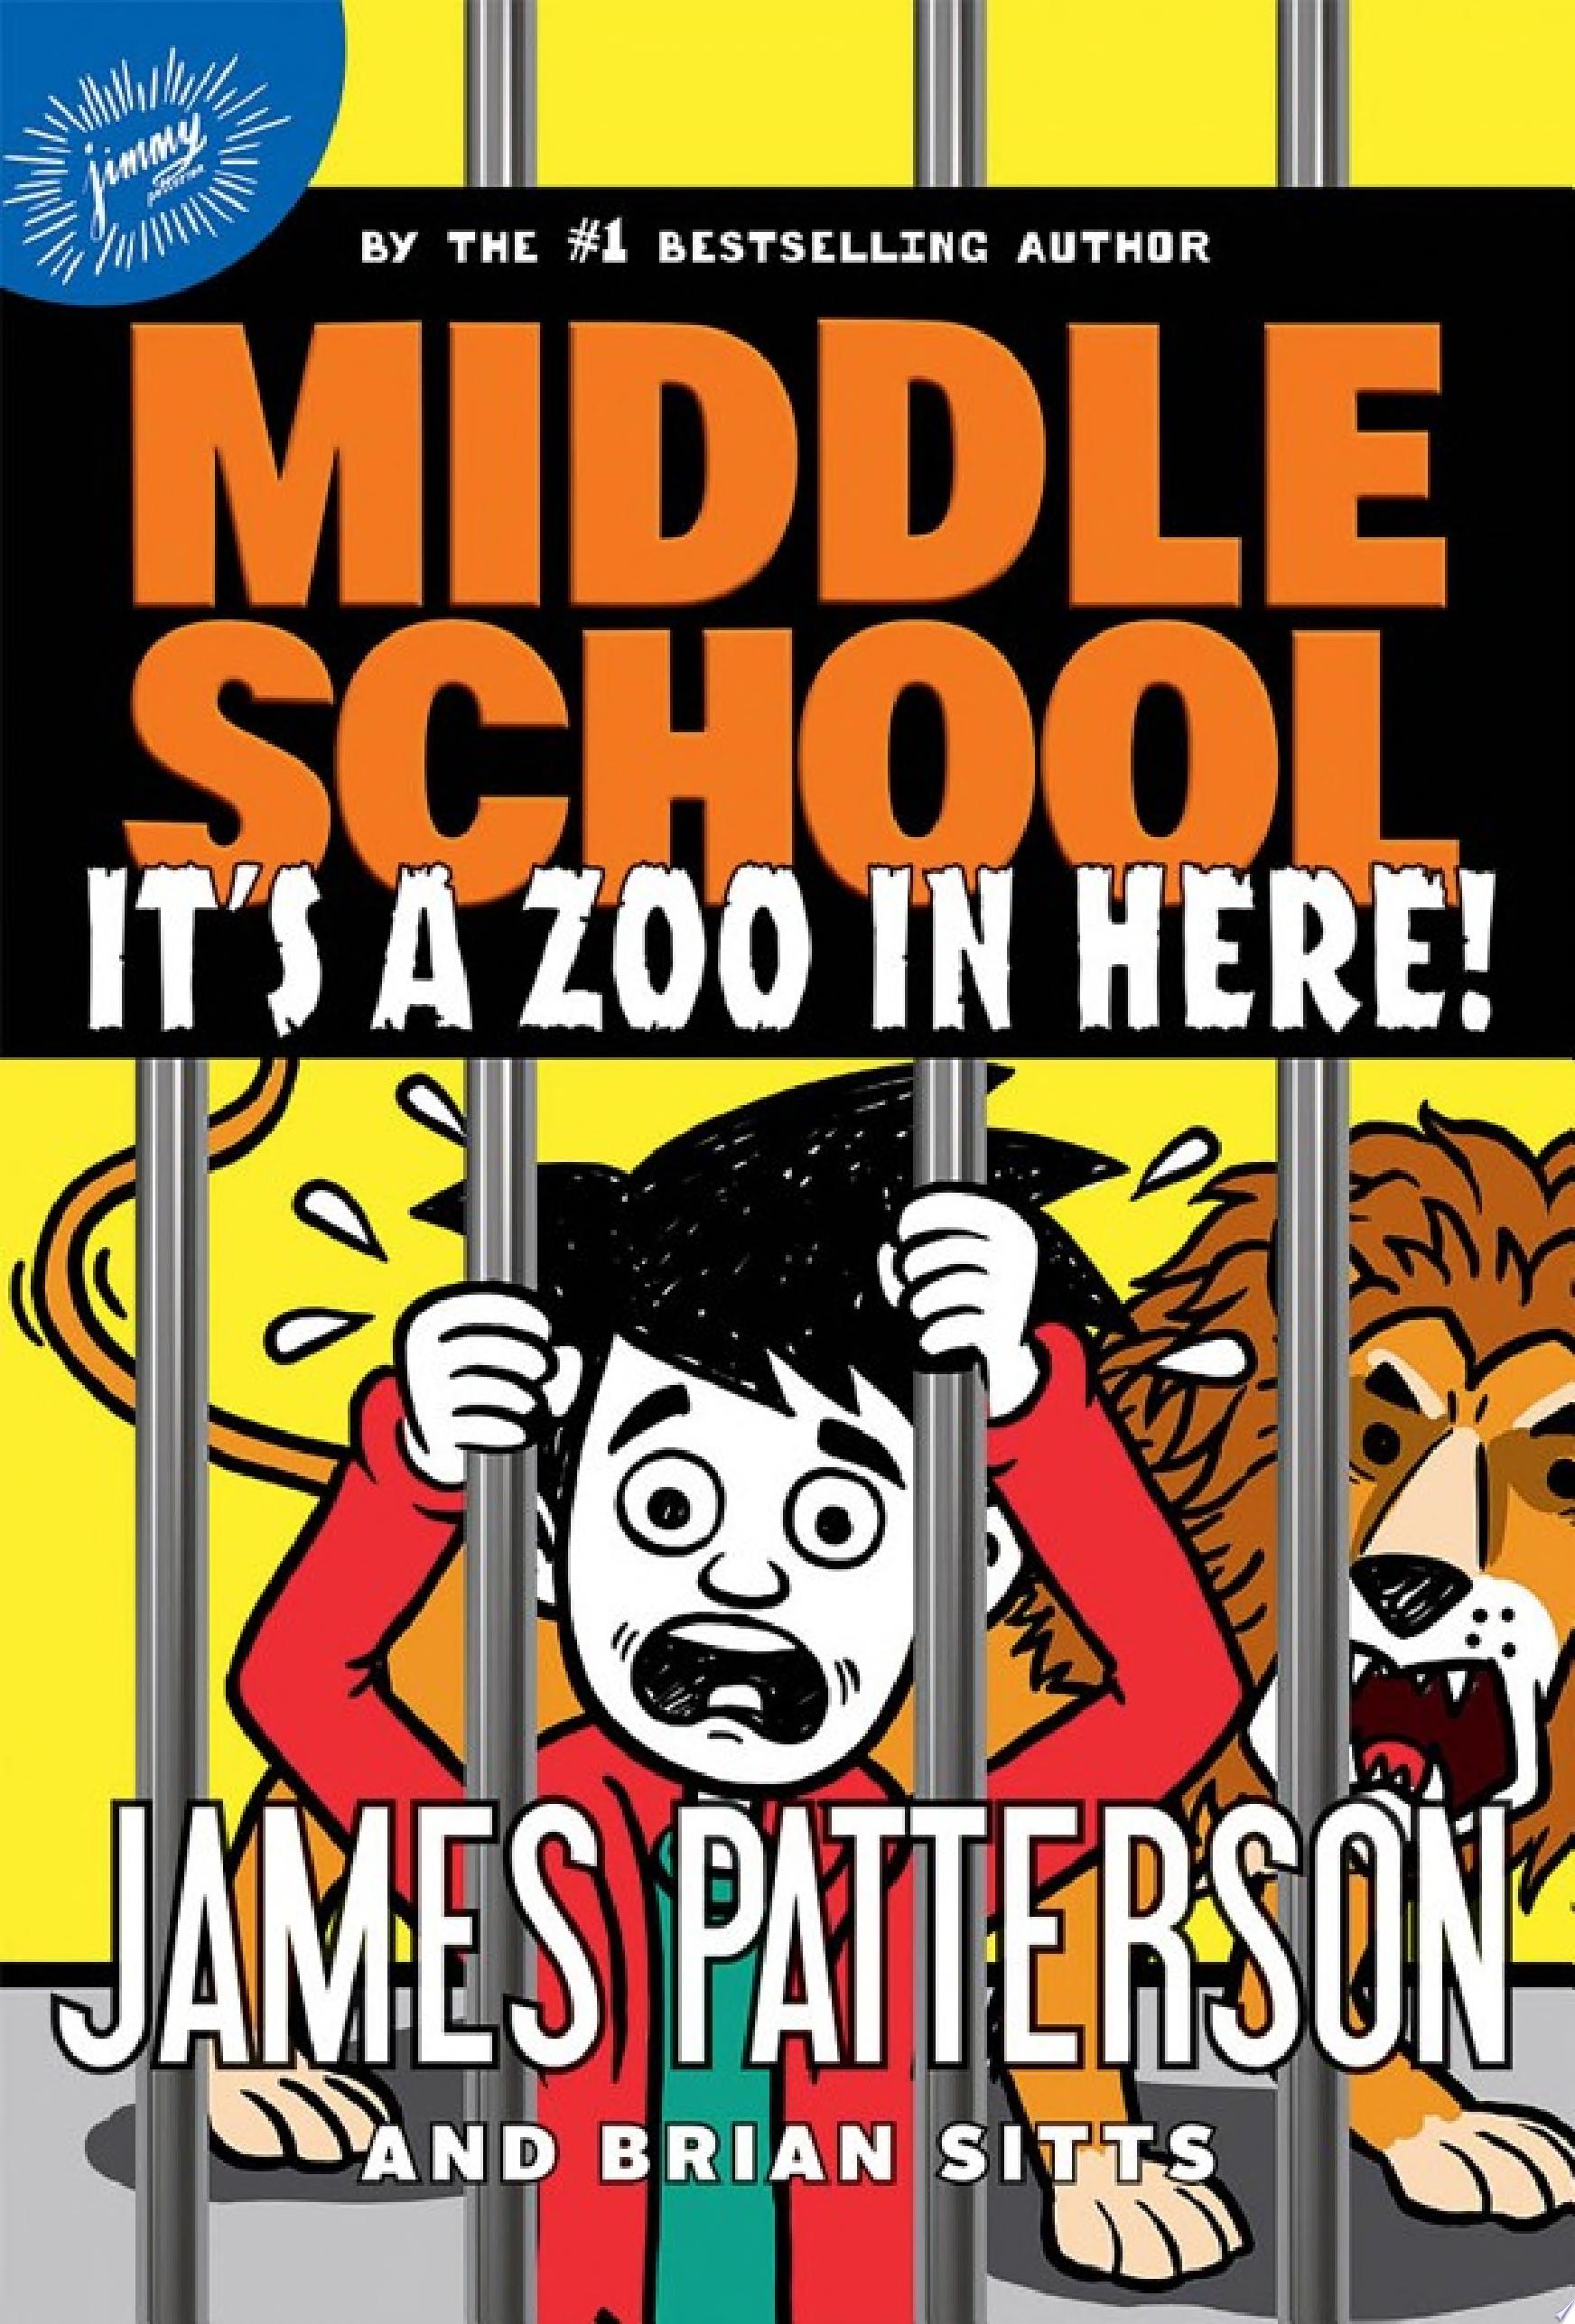 Image for "Middle School: It&#039;s a Zoo in Here!"